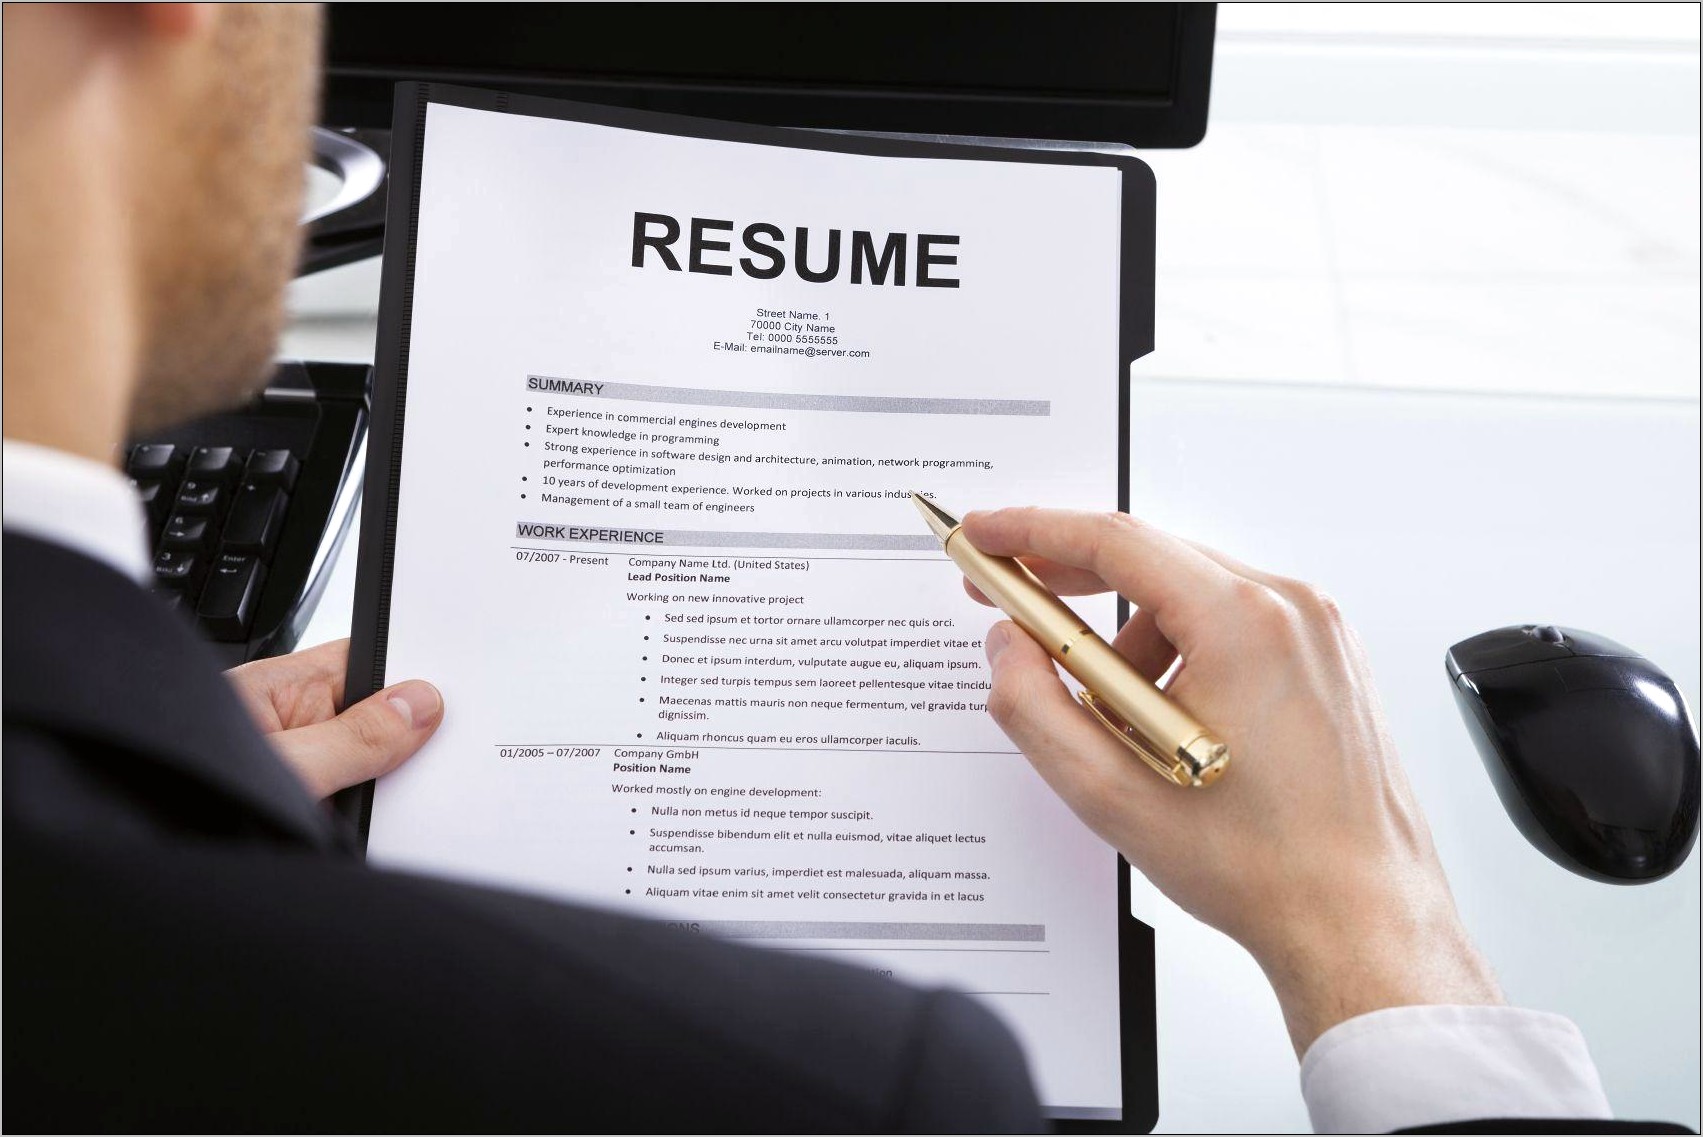 Resume Bullet Point Example Comunication